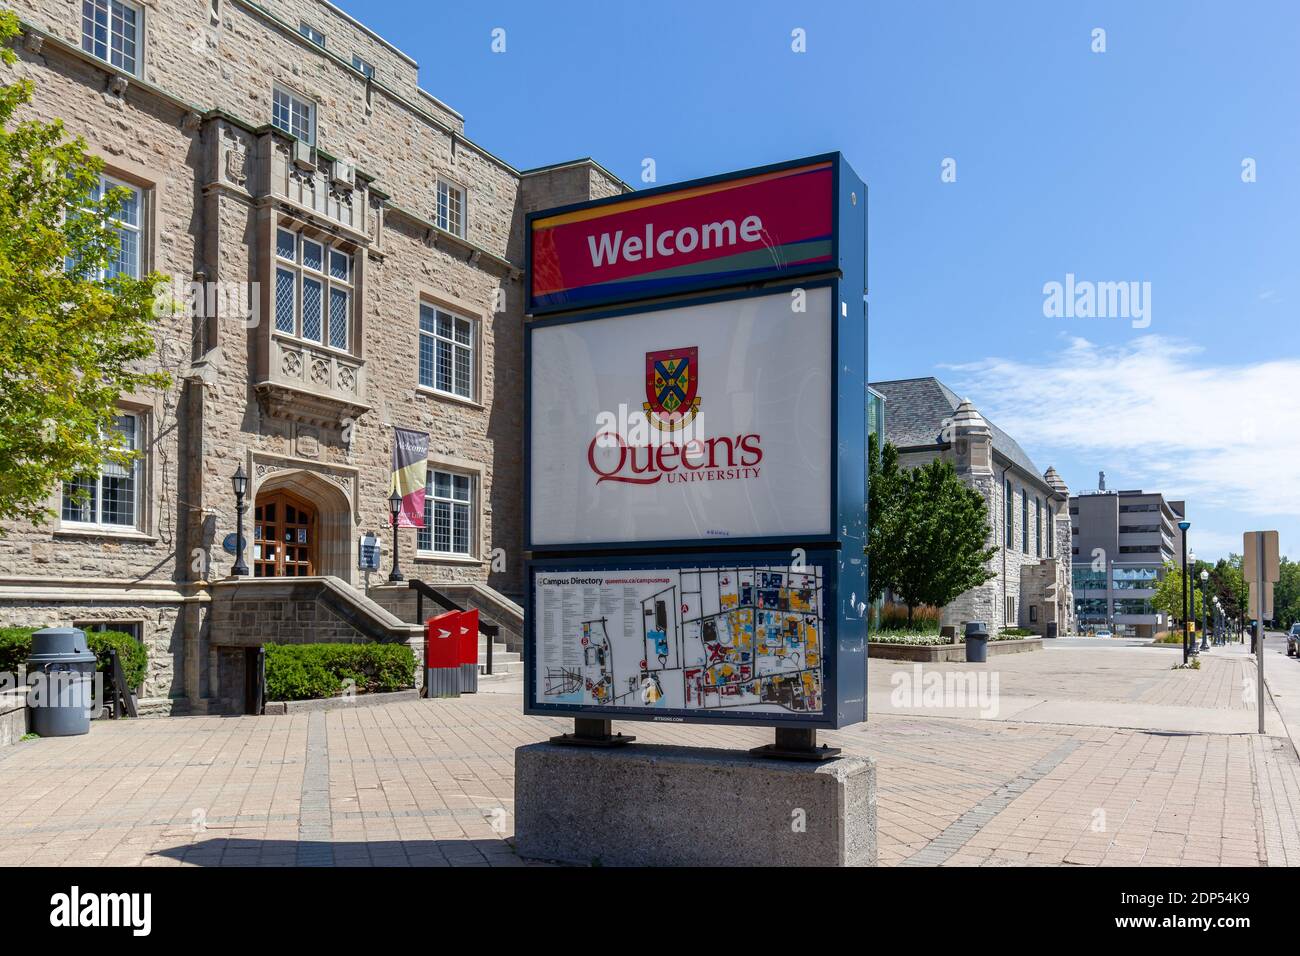 Kingston, Ontario, Canada - August 7, 2020: Queen's University sign is seen at the campus in Kingston, Ontario, Canada Stock Photo